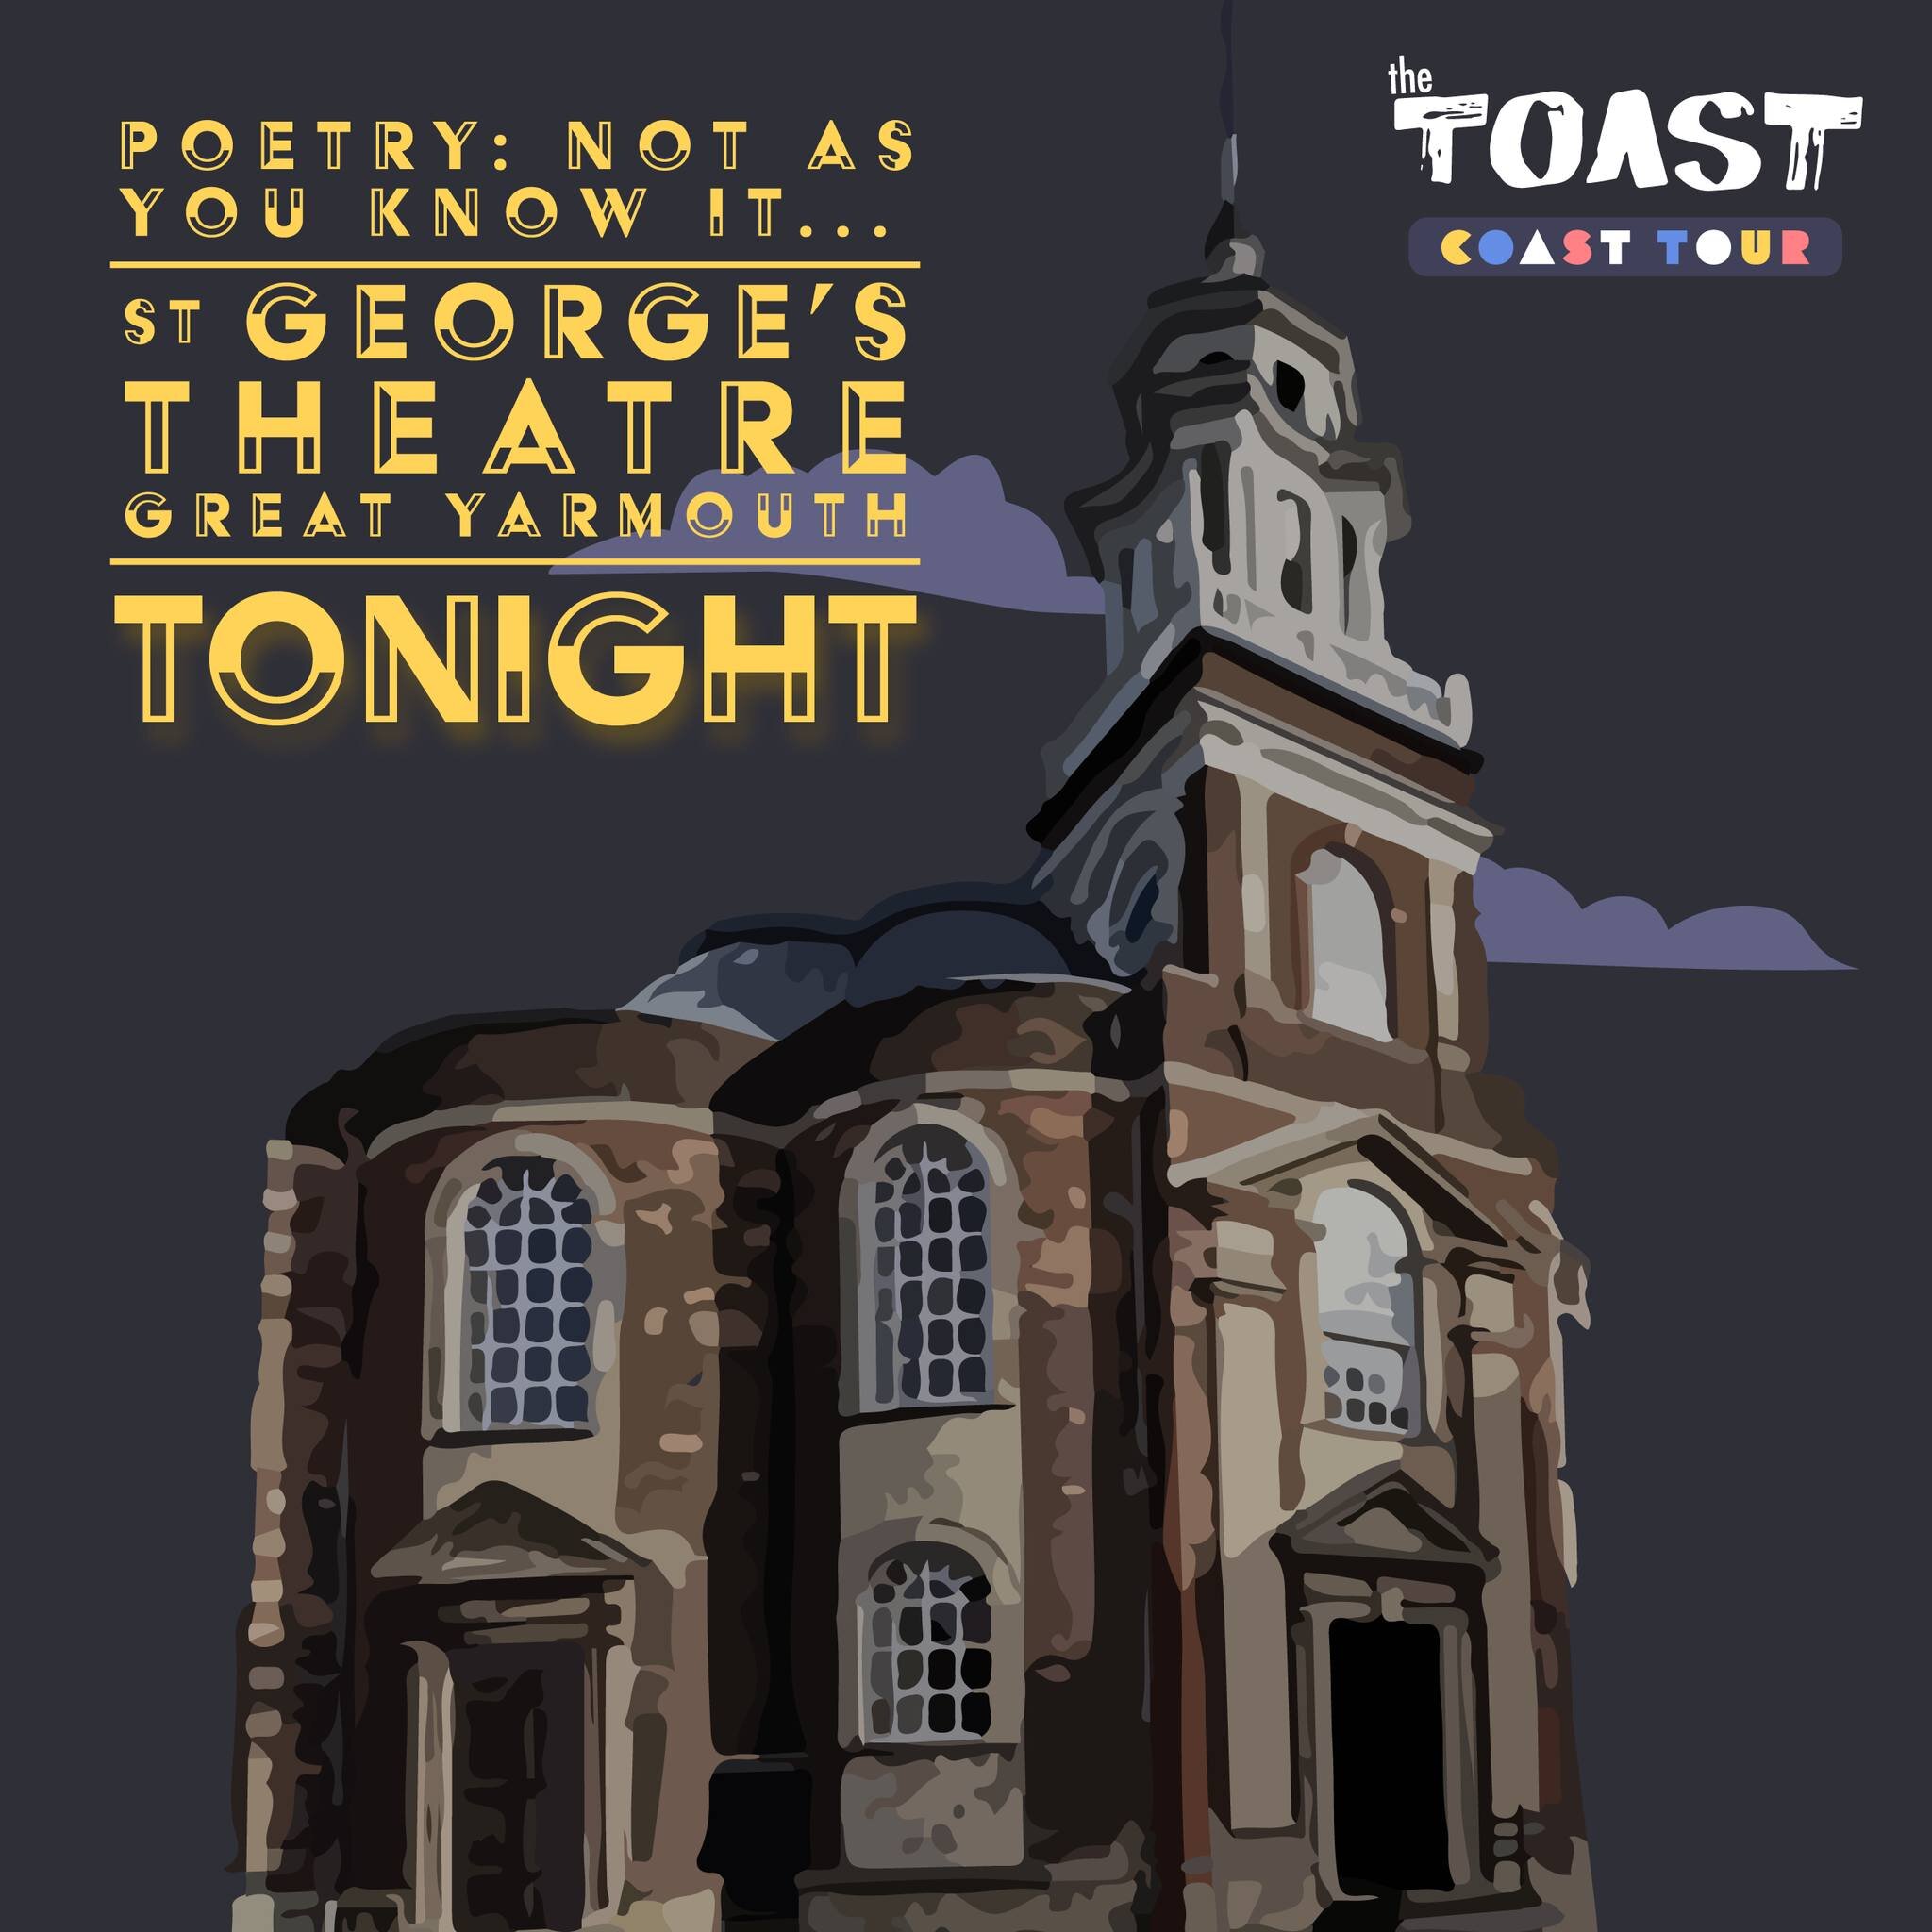 The TOAST Coast Tour: Night 2

Ok, lets go... Night 2 in the very very wonderful St George's Theatre in Great Yarmouth. With an absolutely wild history dating back to 1711, this is one VERY special place and we're so pleased to be bringing TOAST here